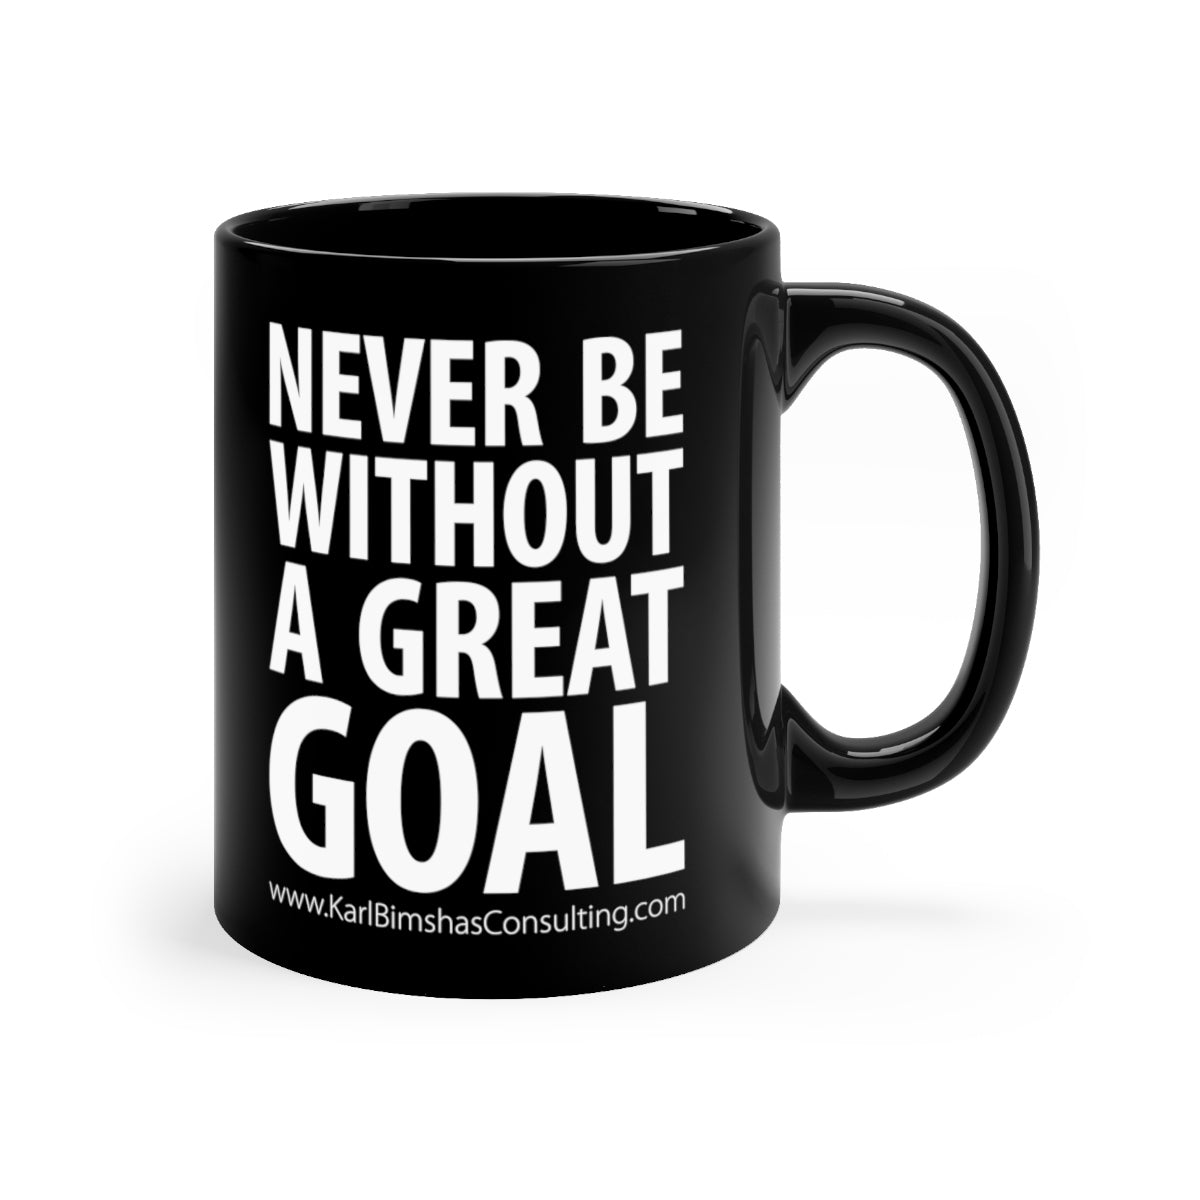 Never Be Without a Great Goal - 11oz Mug